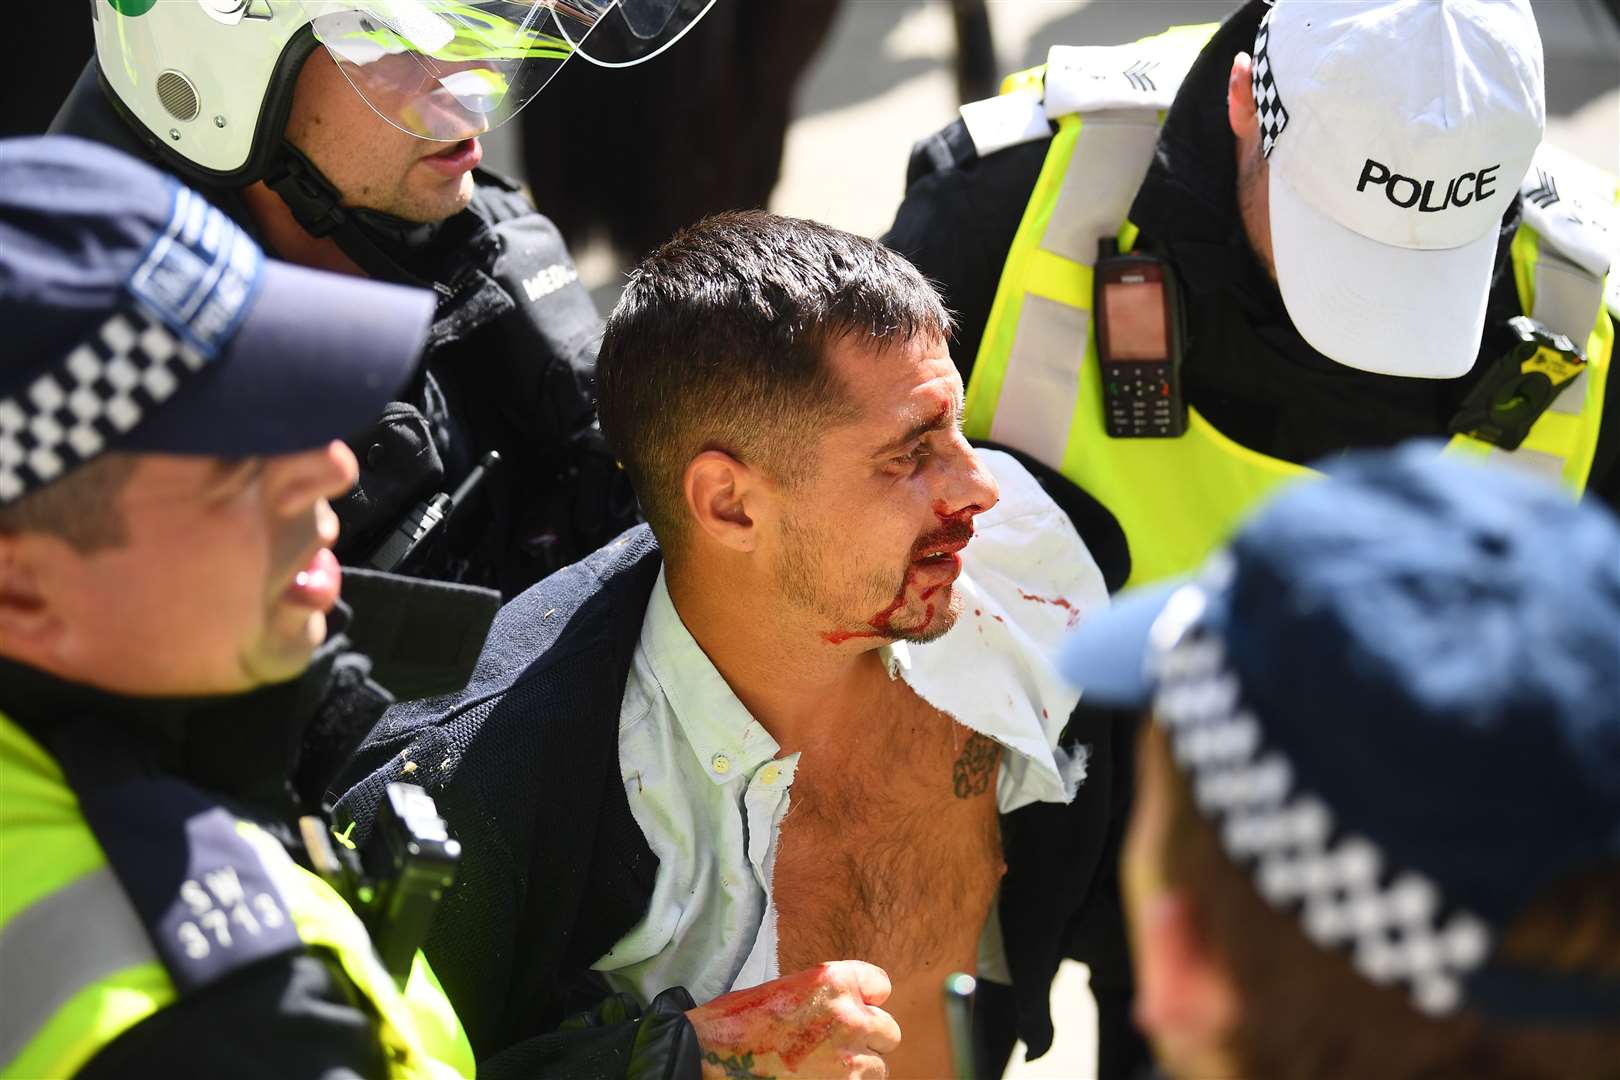 A demonstrator with a facial injury in Trafalgar Square, London (Victoria Jones/PA)